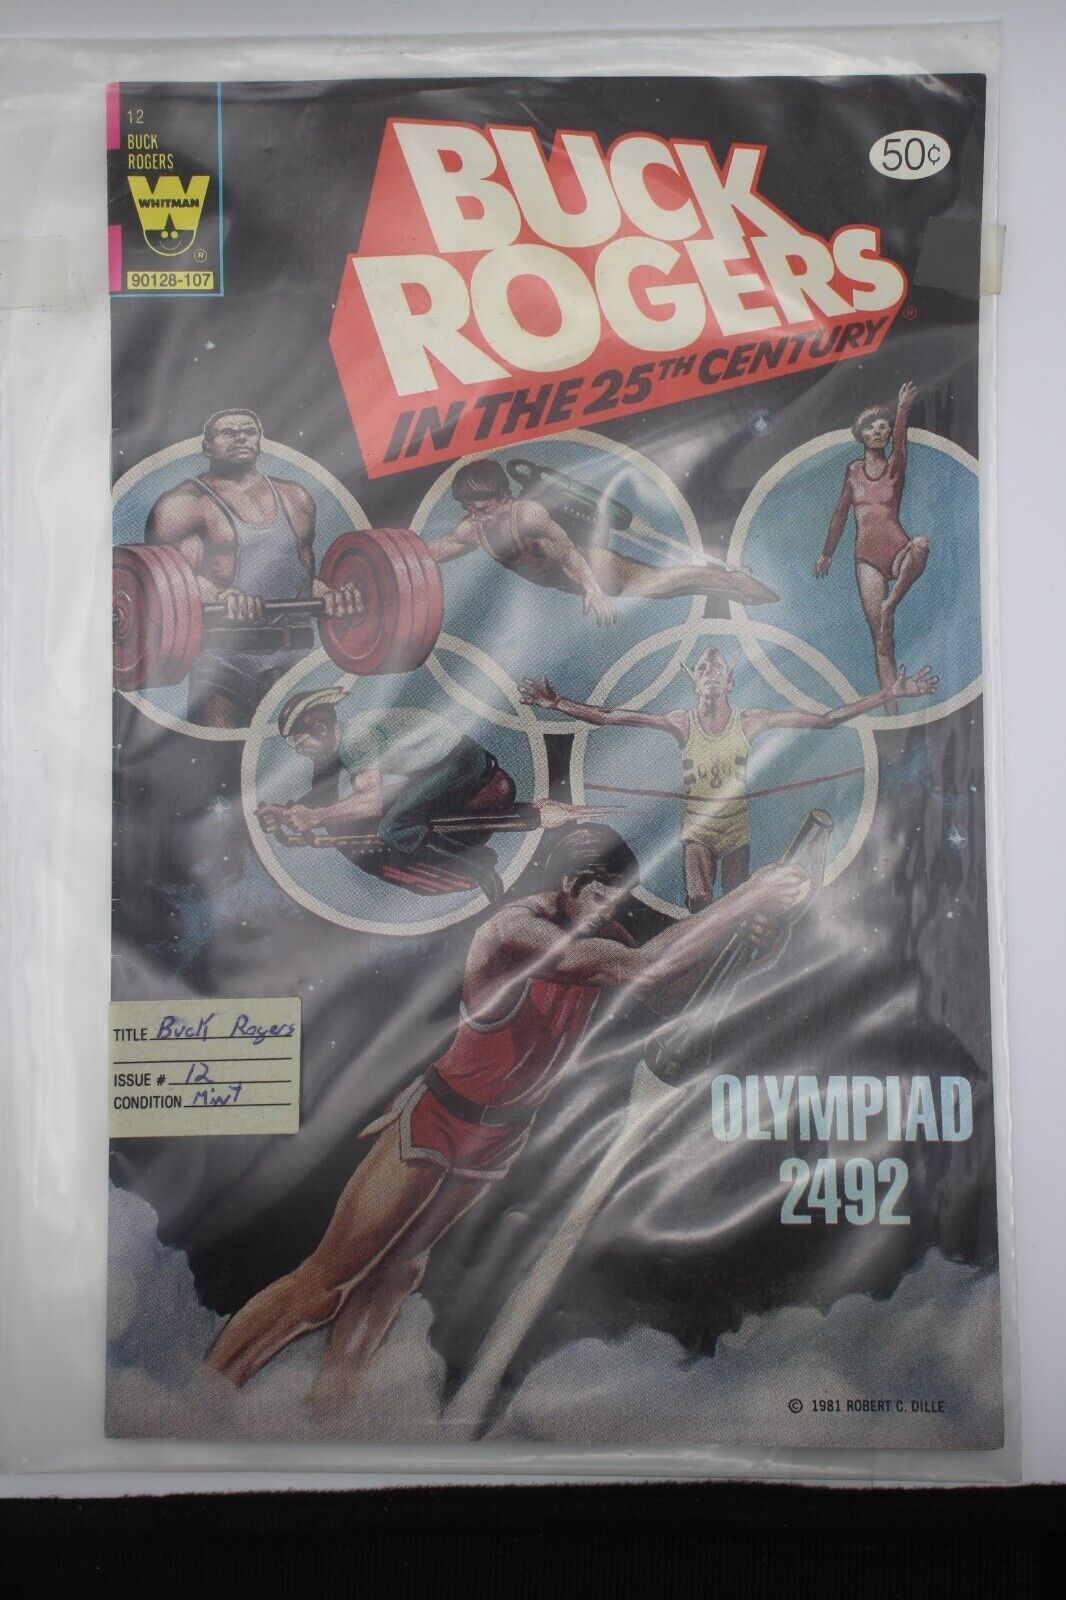 1981BUCK ROGERS in the 25th Century OLYMPIAD 2492 WHITMAN COMICS #12 - MINT COND